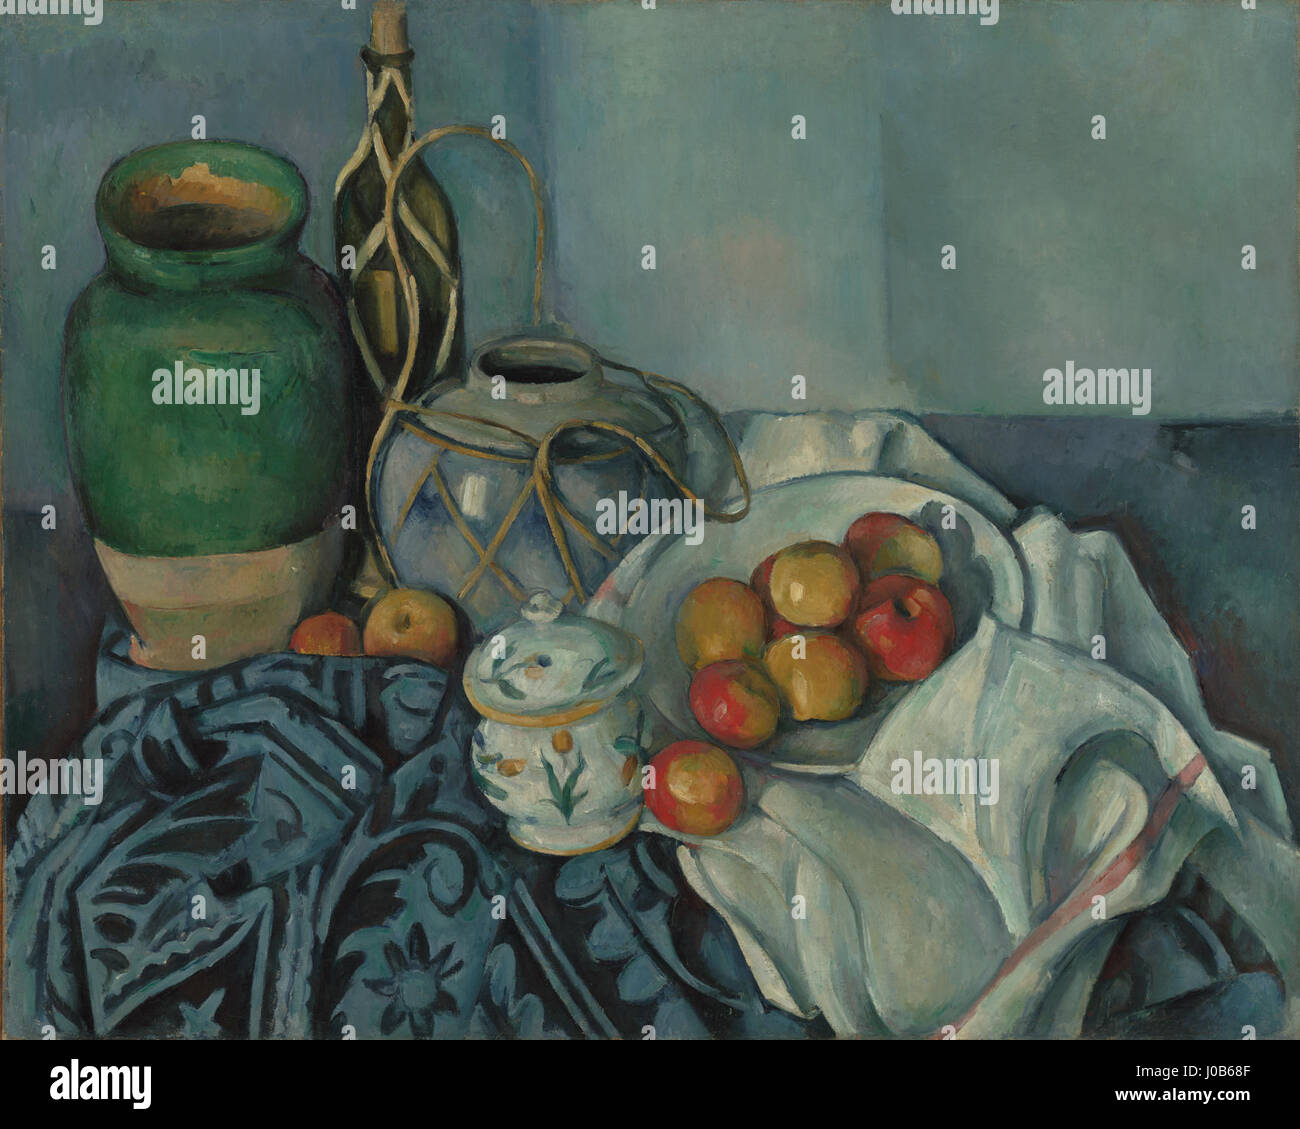 Paul Cézanne - Still Life with Apples - 96.PA.8 - J. Paul Getty Museum Stock Photo